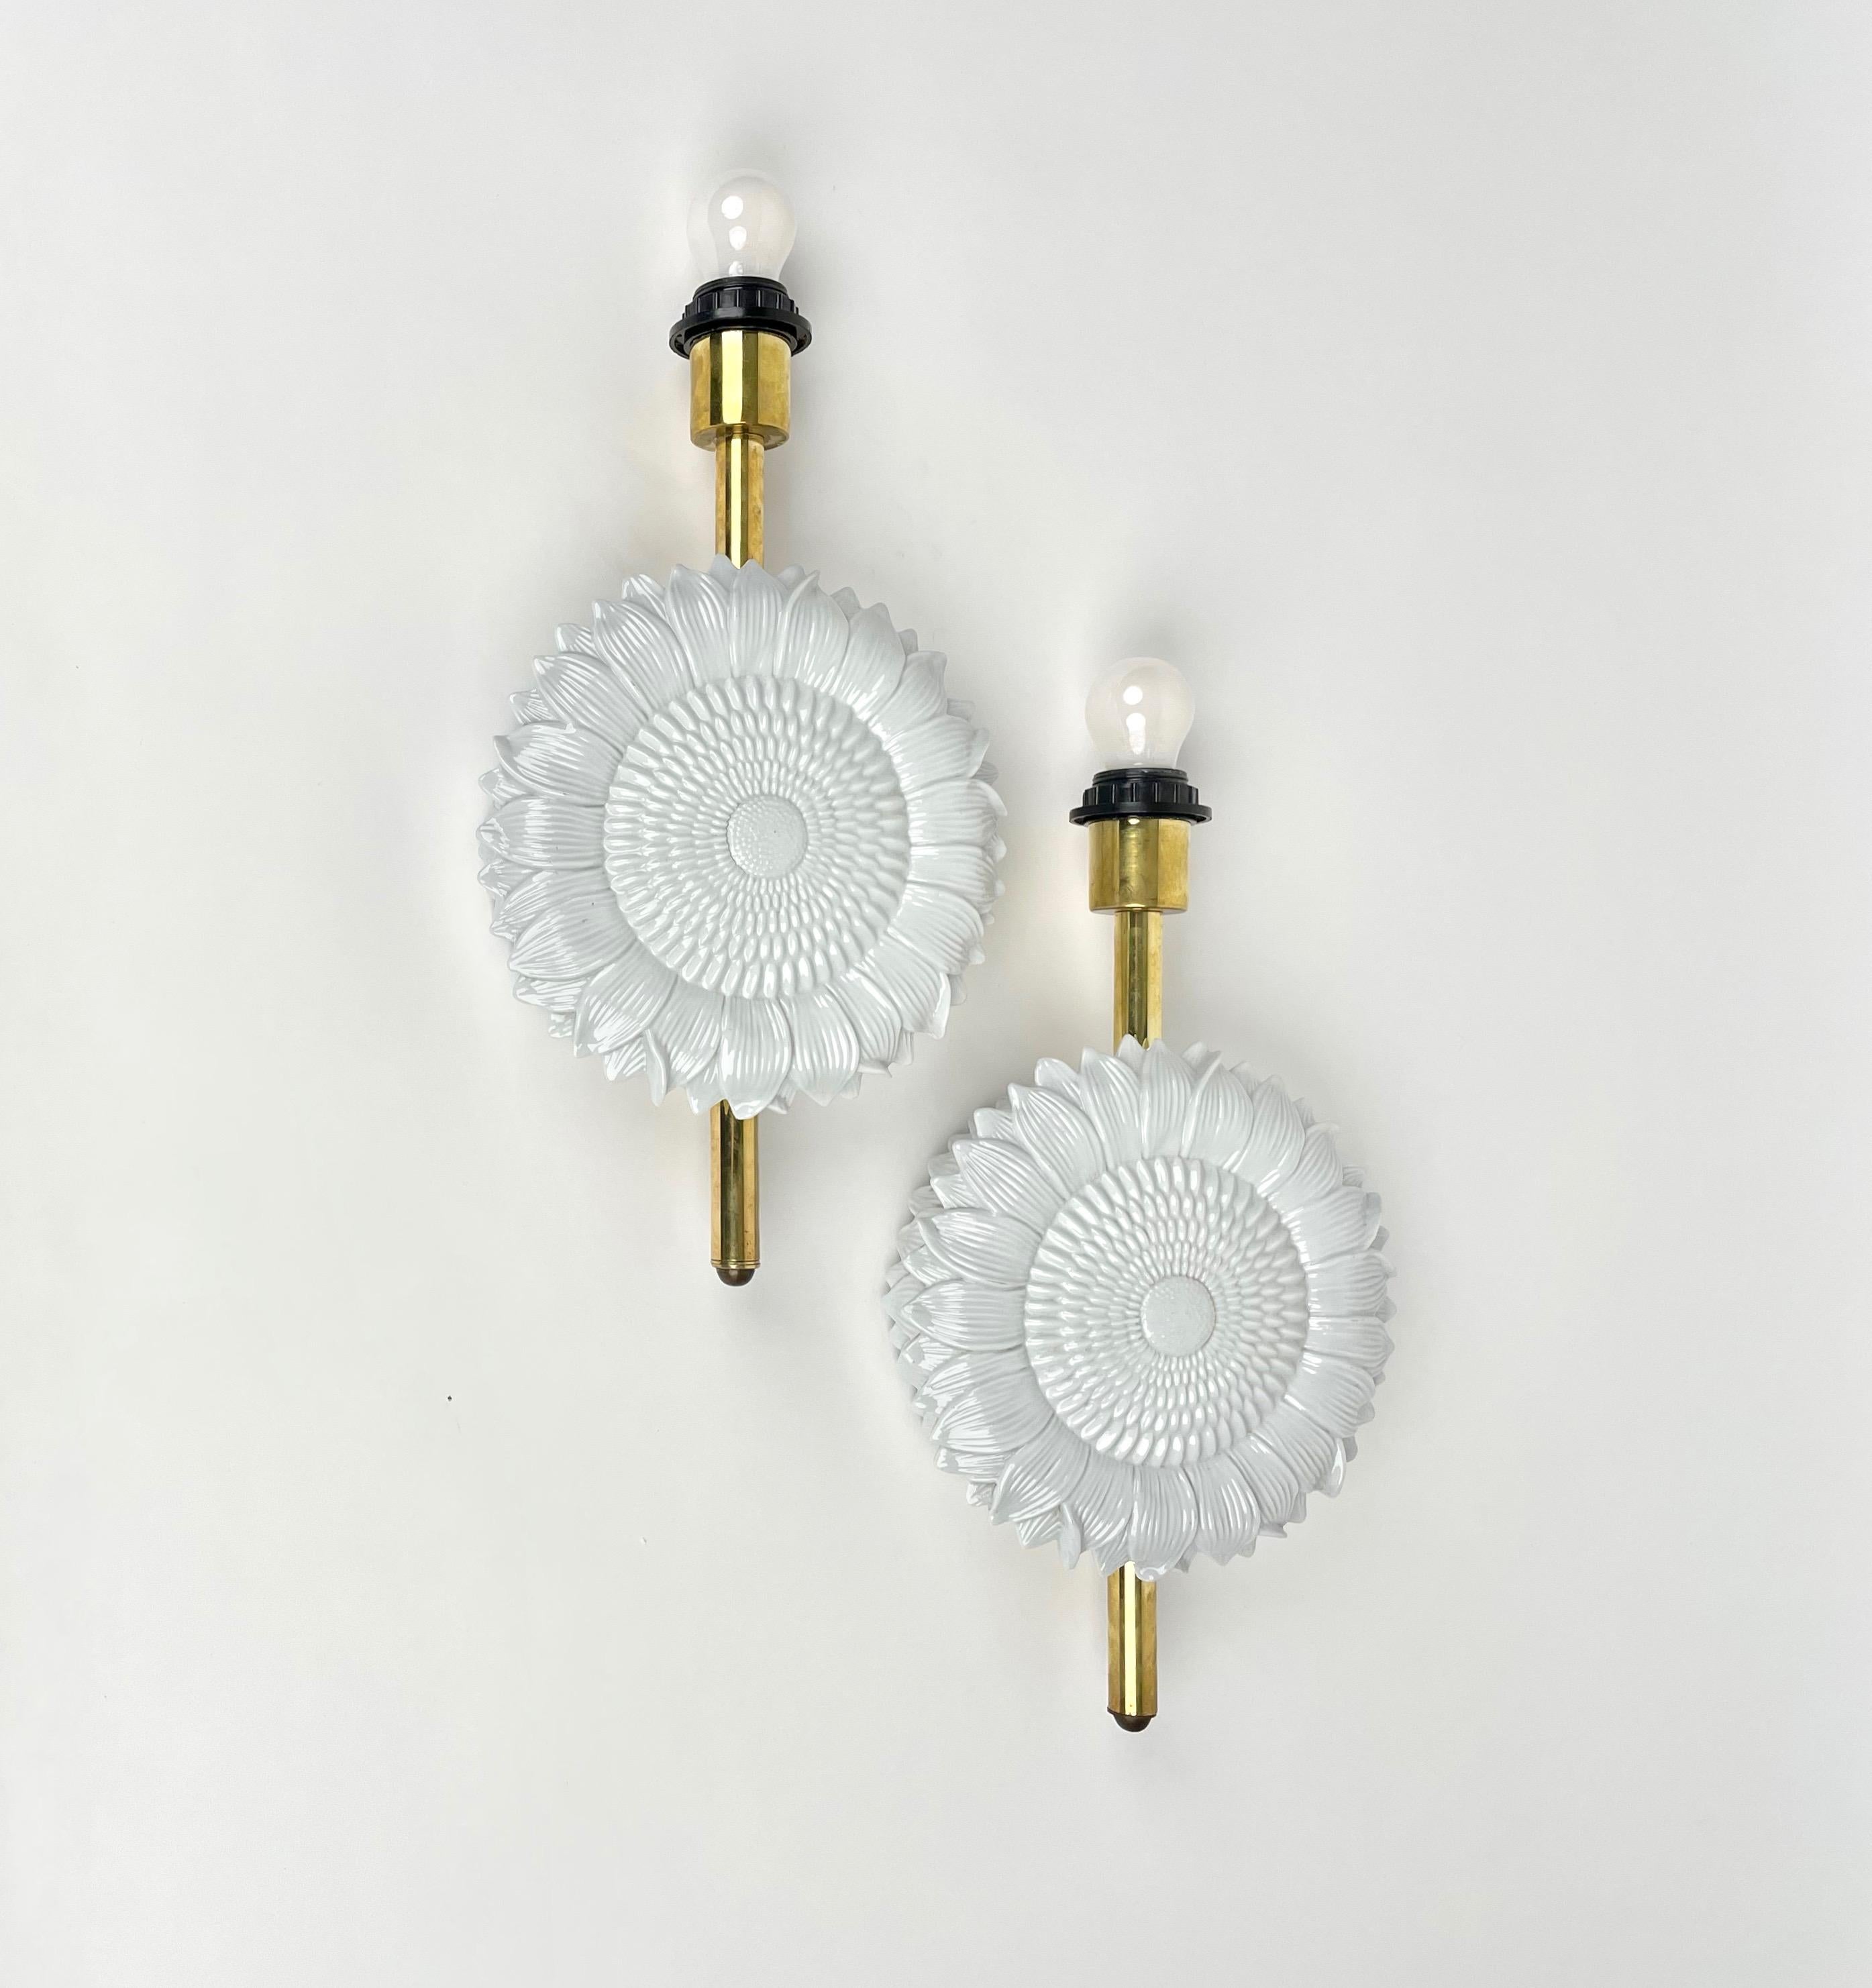 Pair of wall light sconces in floral decor white ceramics and brass.

Made in Italy in the 1970s.